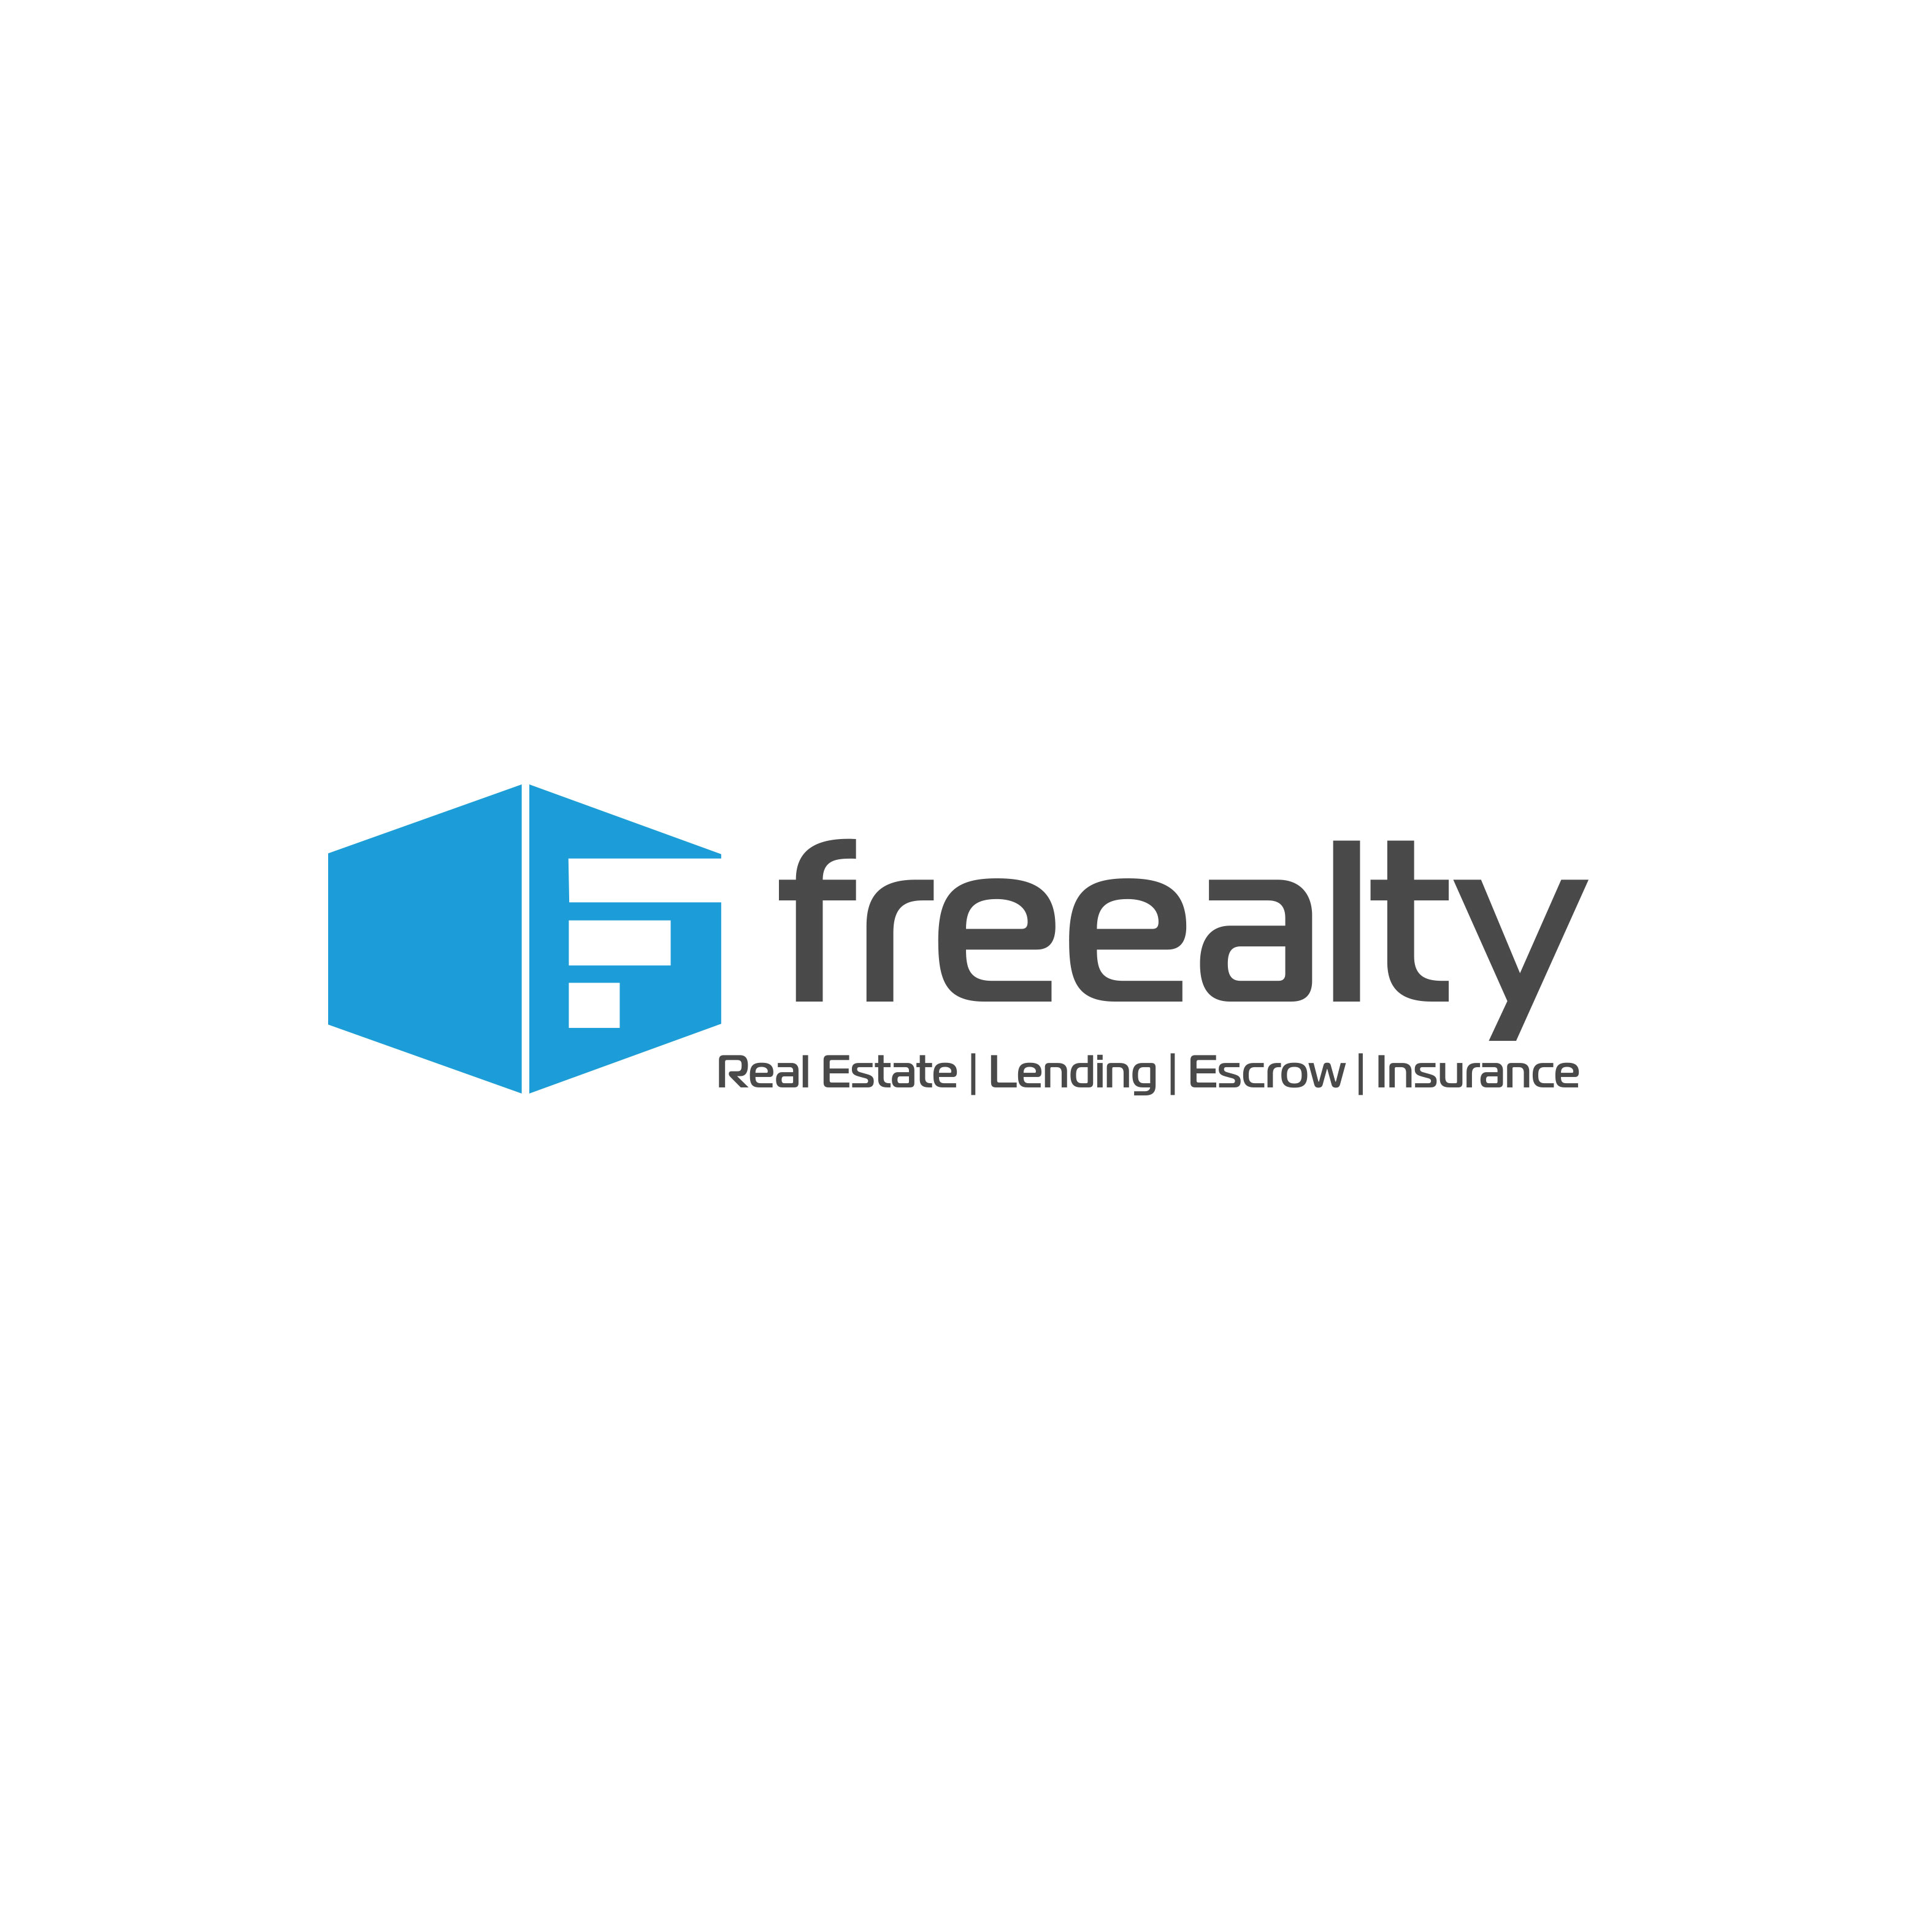 Logo design for Freealty offering real estate, lending, escrow and insurance services.